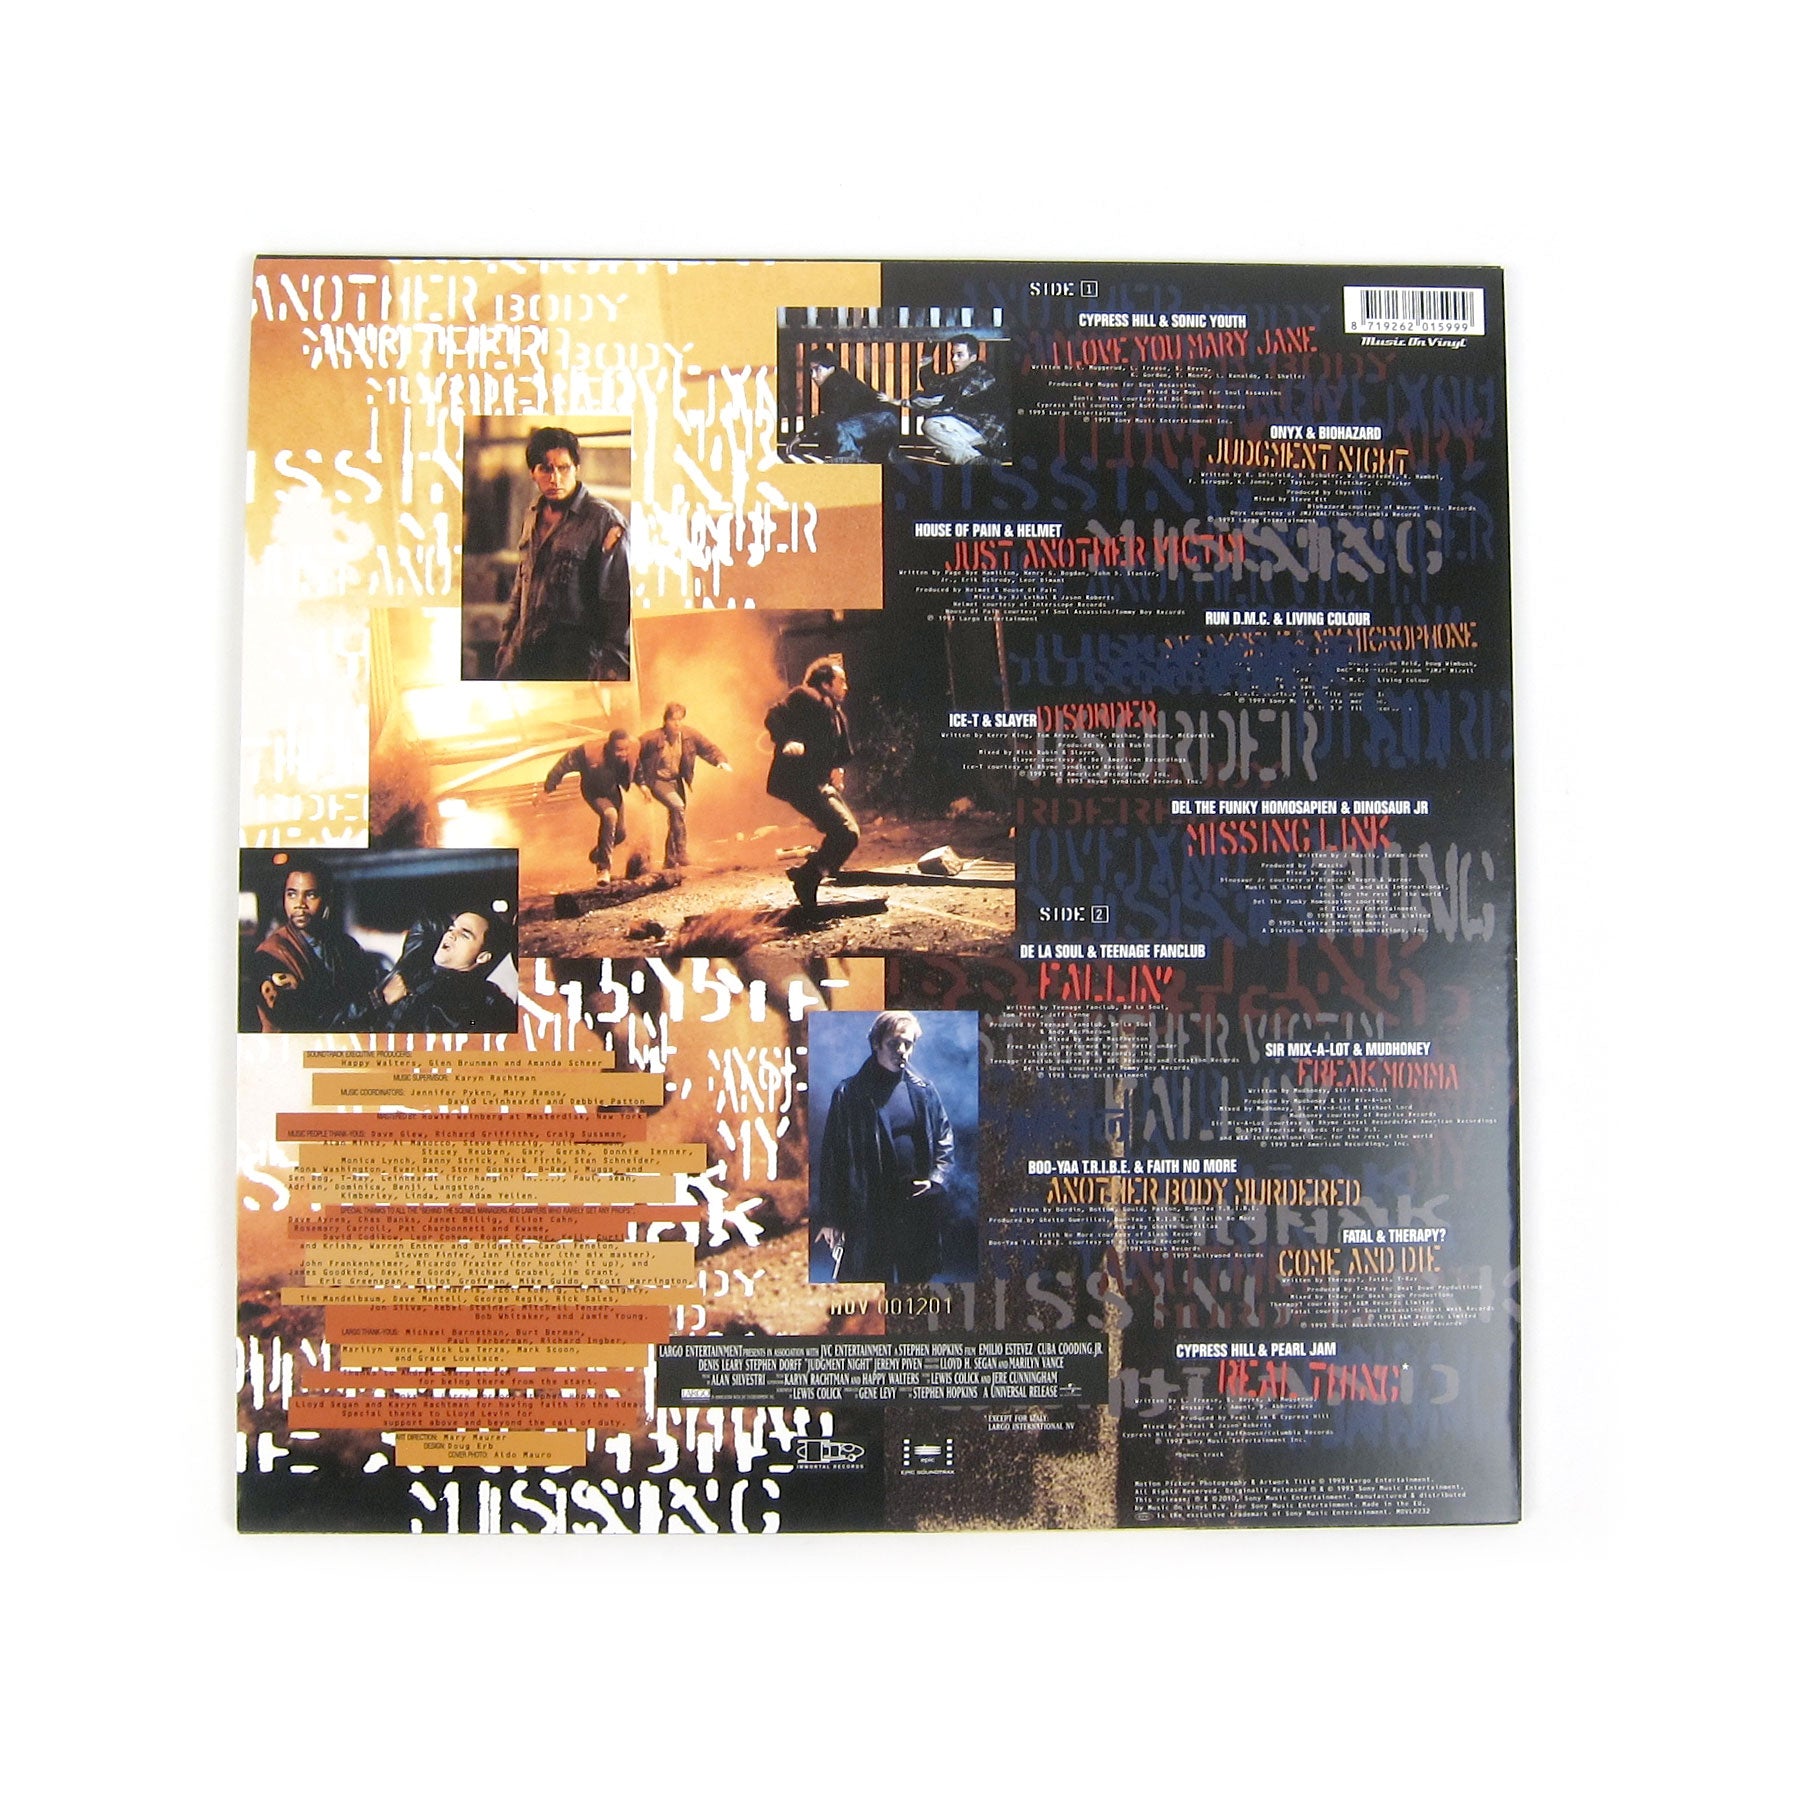 judgment night soundtrack discogs